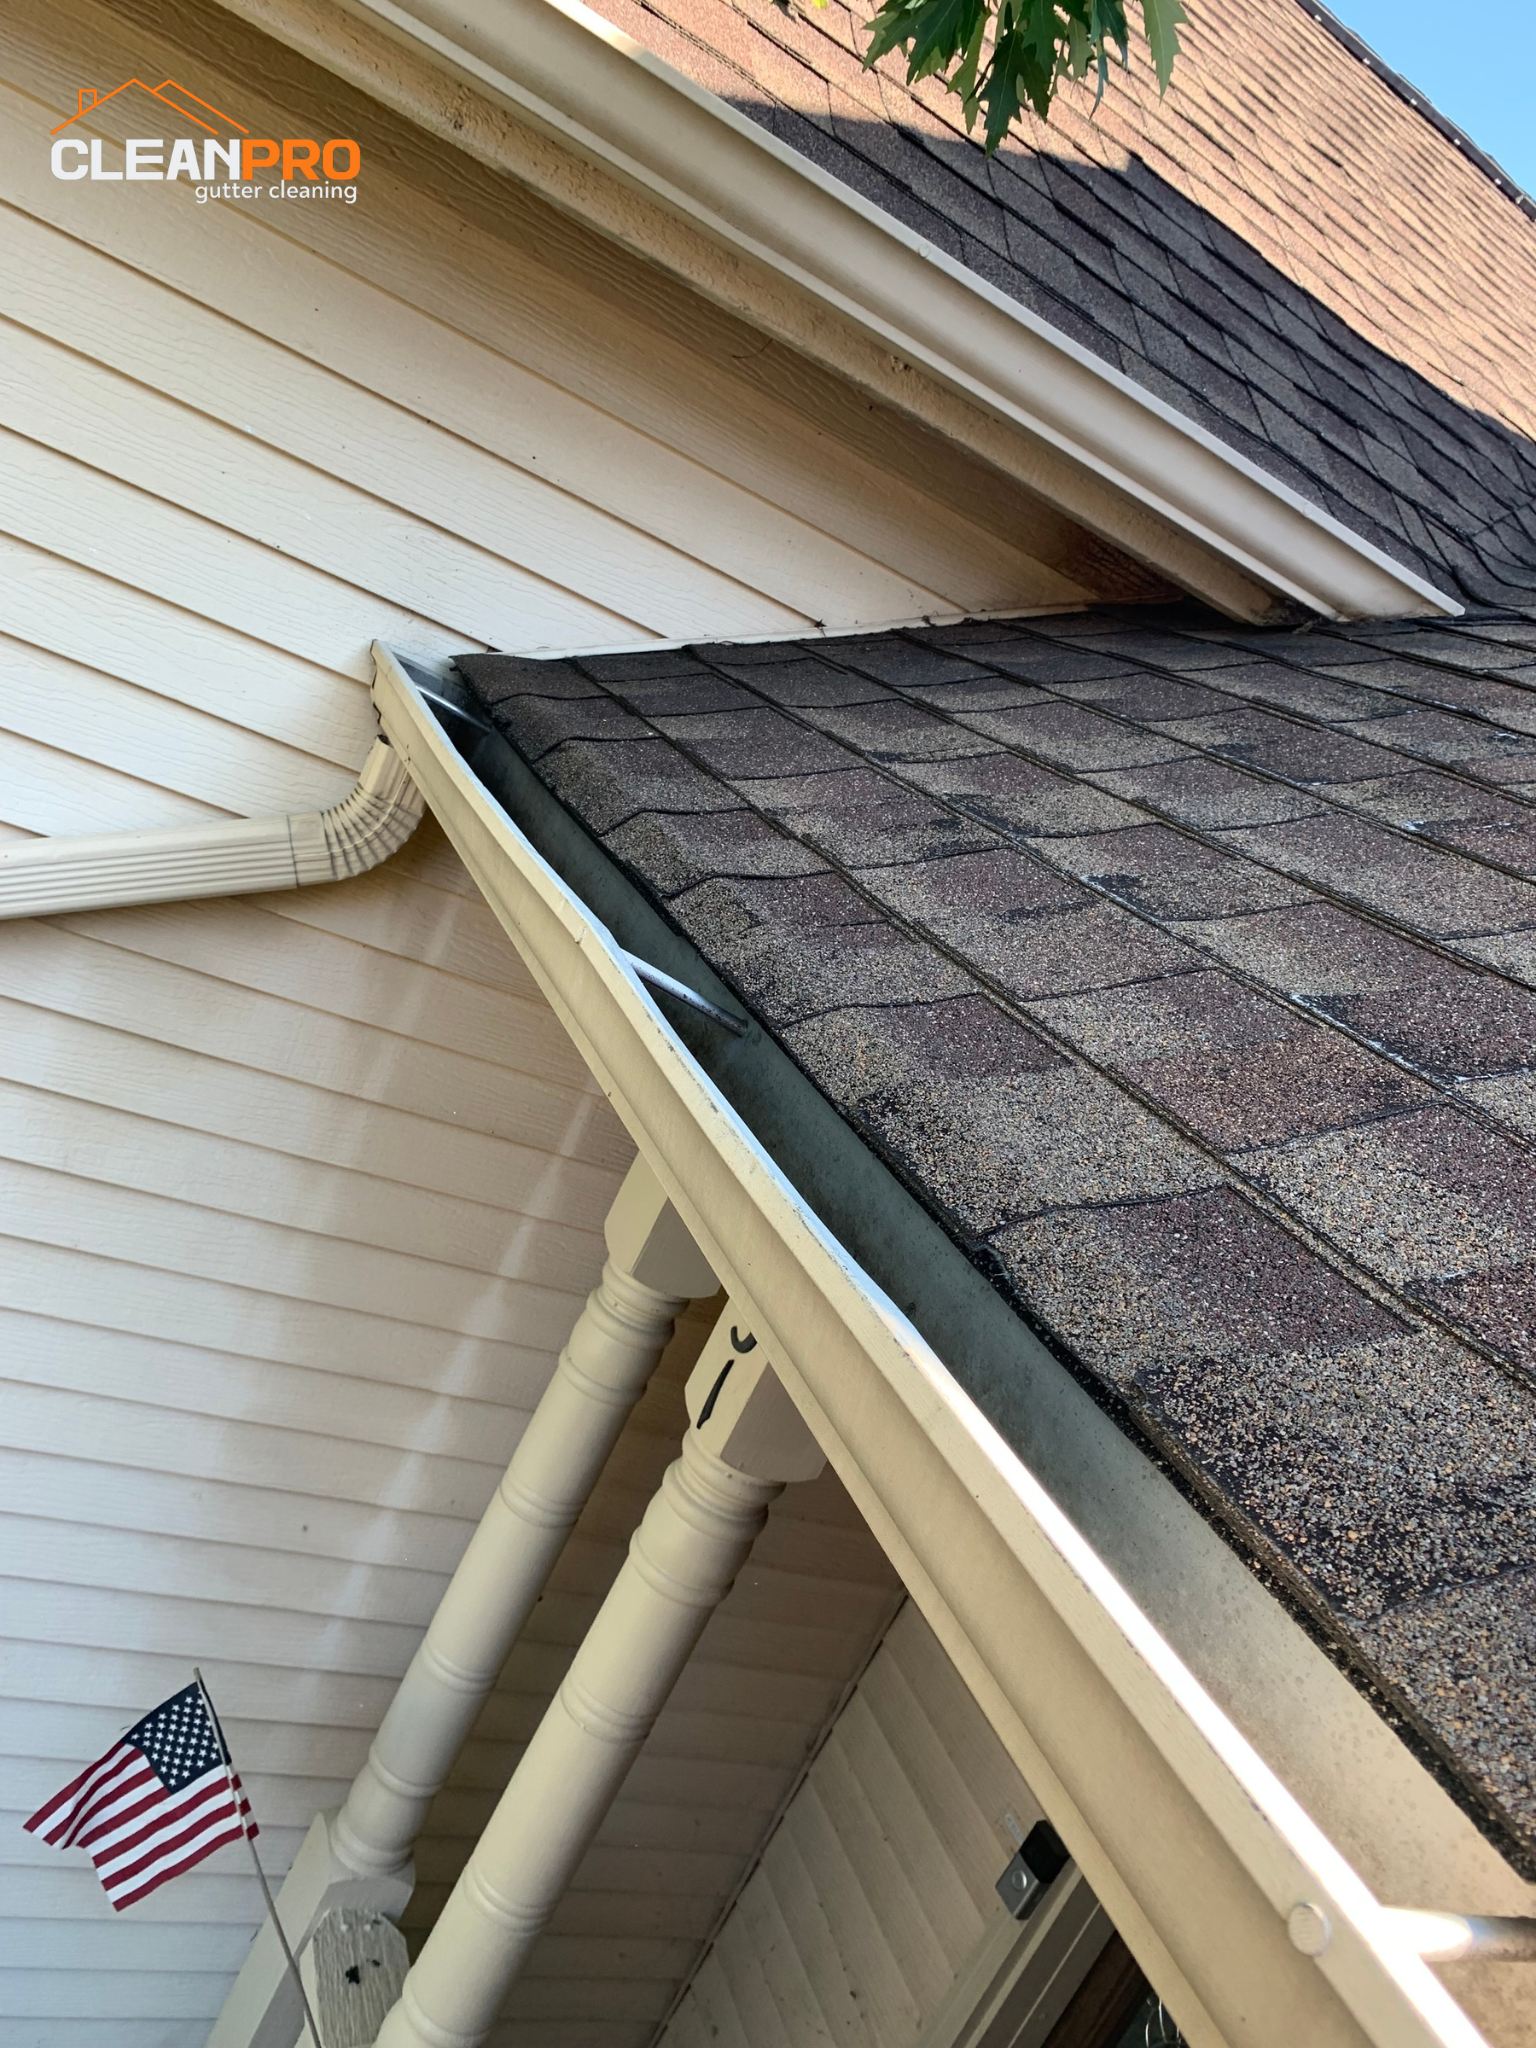 Quality Gutter Cleaning in Cleveland OH